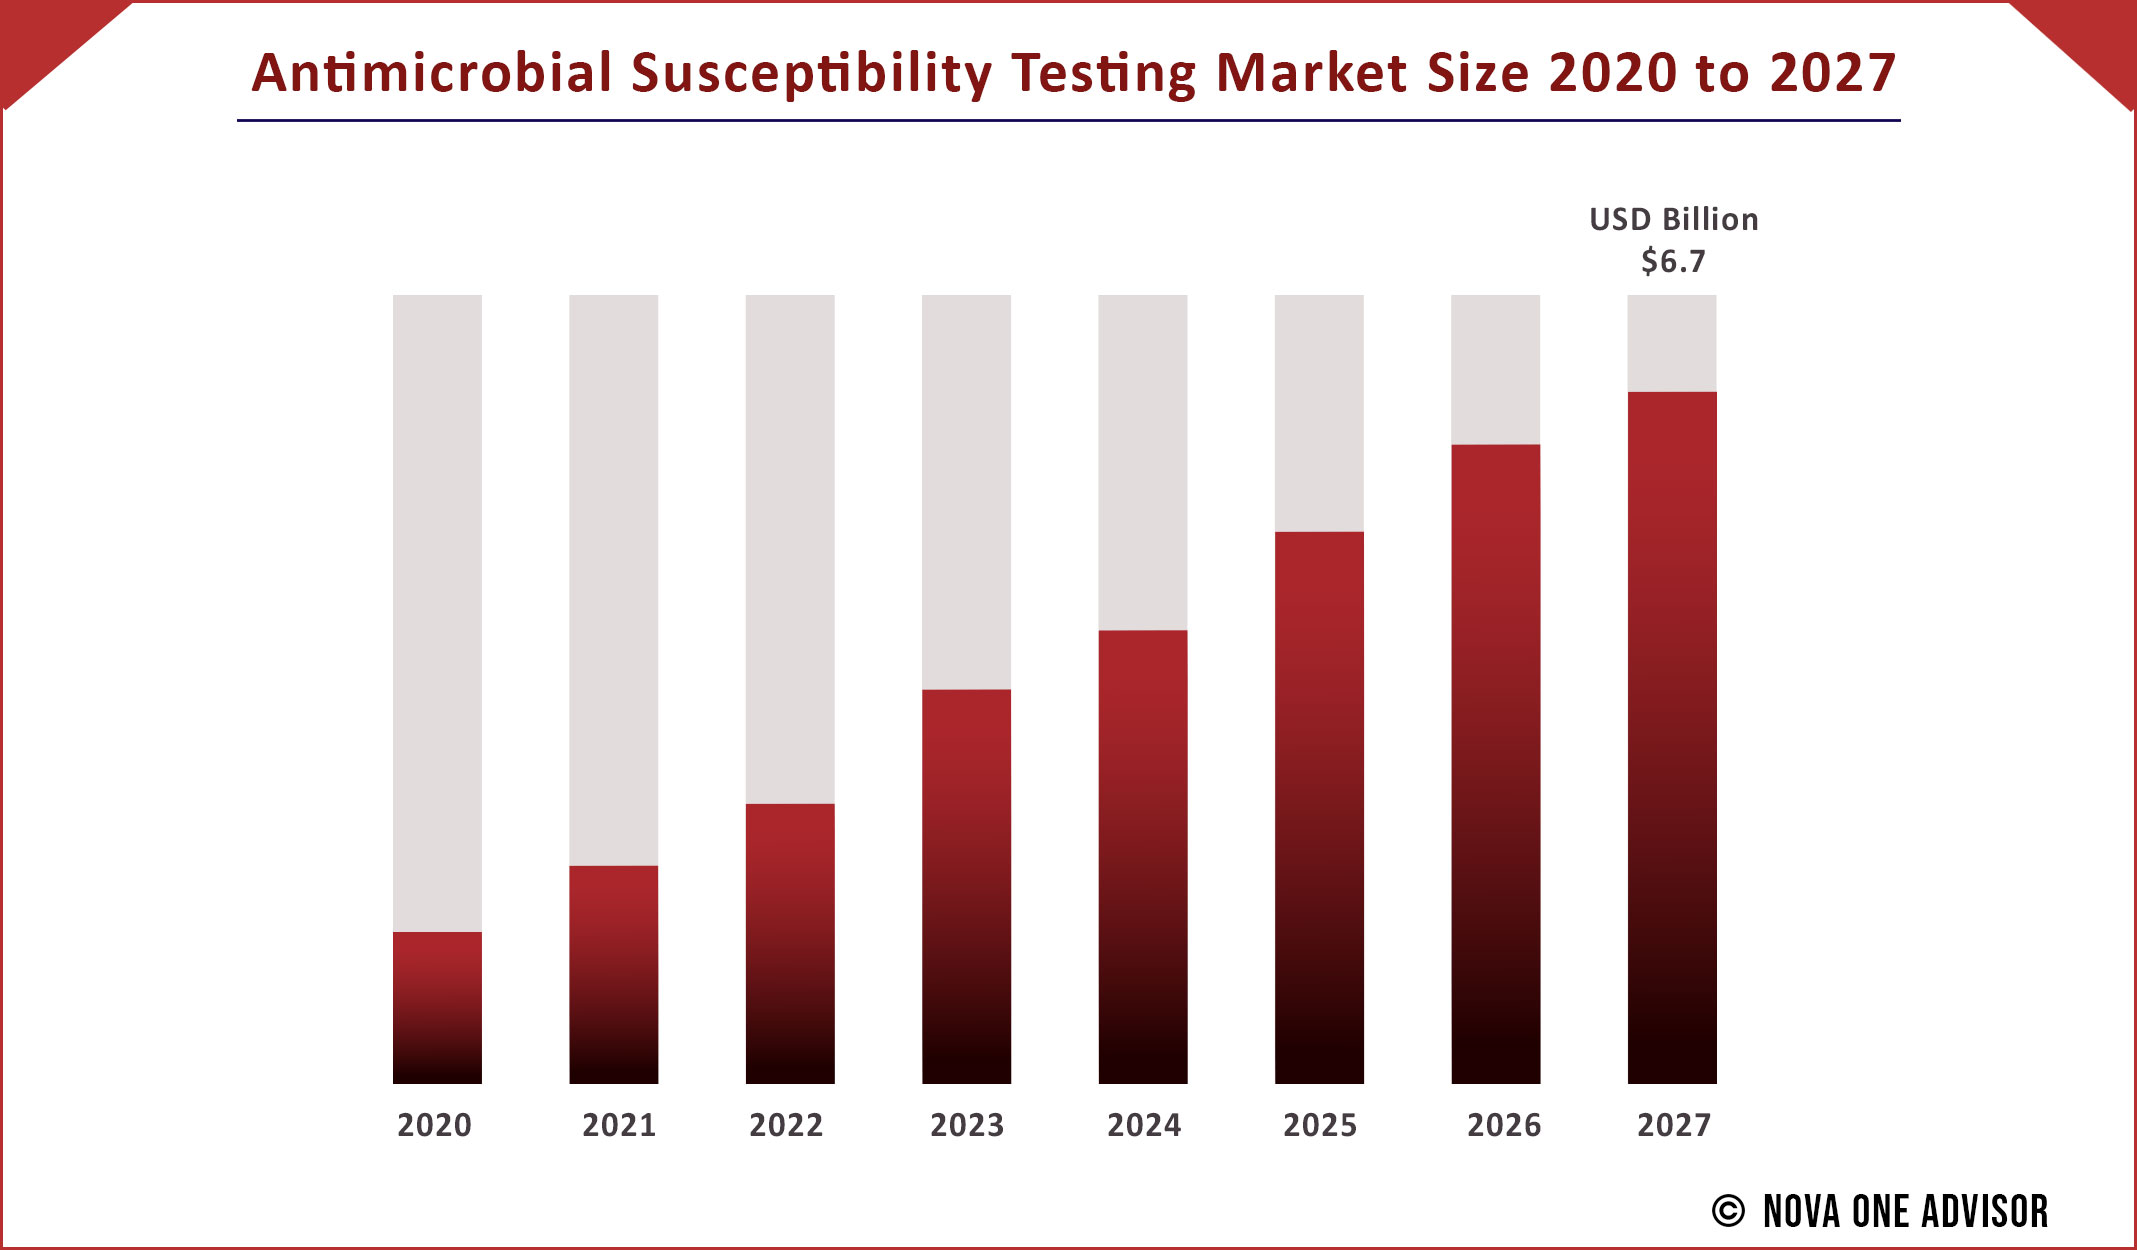 Antimicrobial Susceptibility Testing Market Size 2020 to 2027